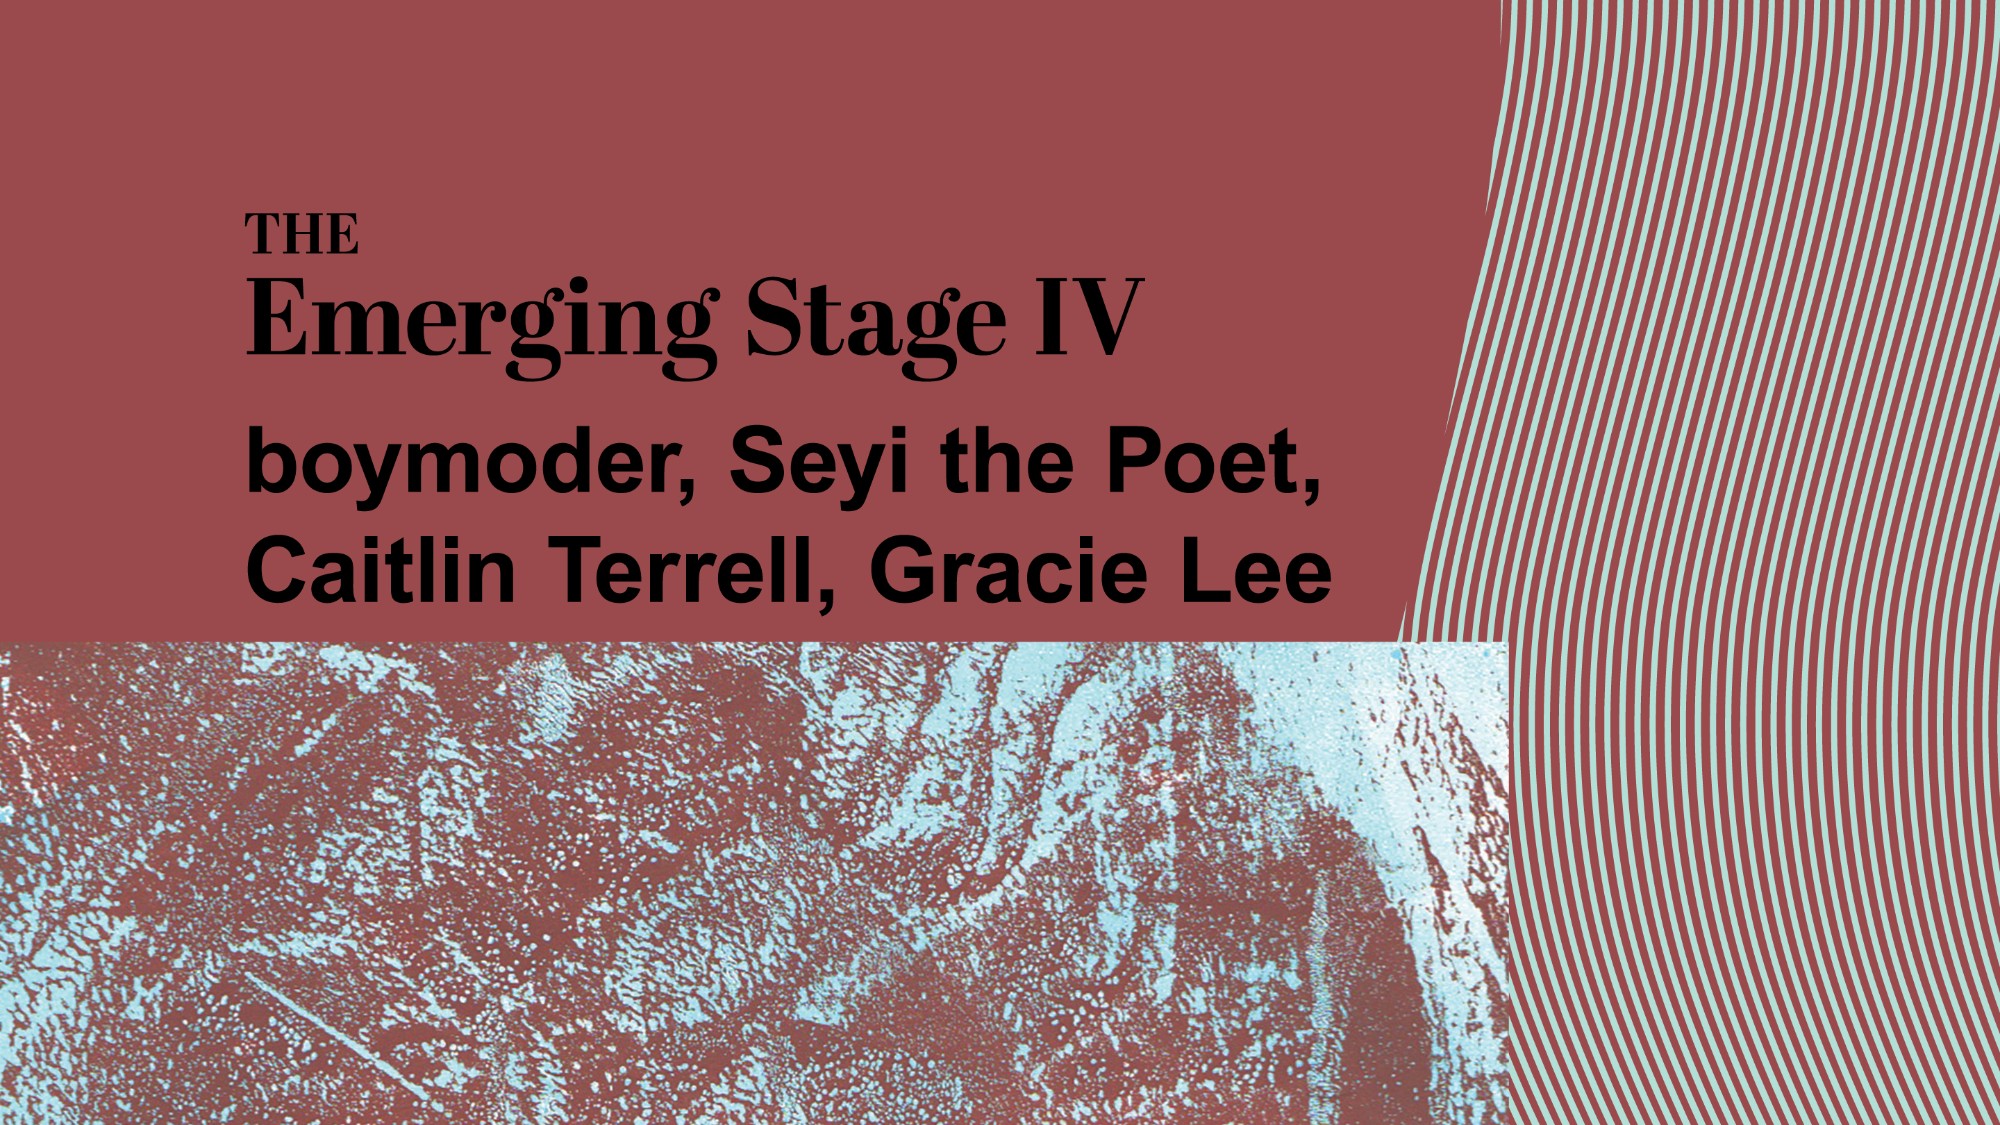 The Emerging Stage IV